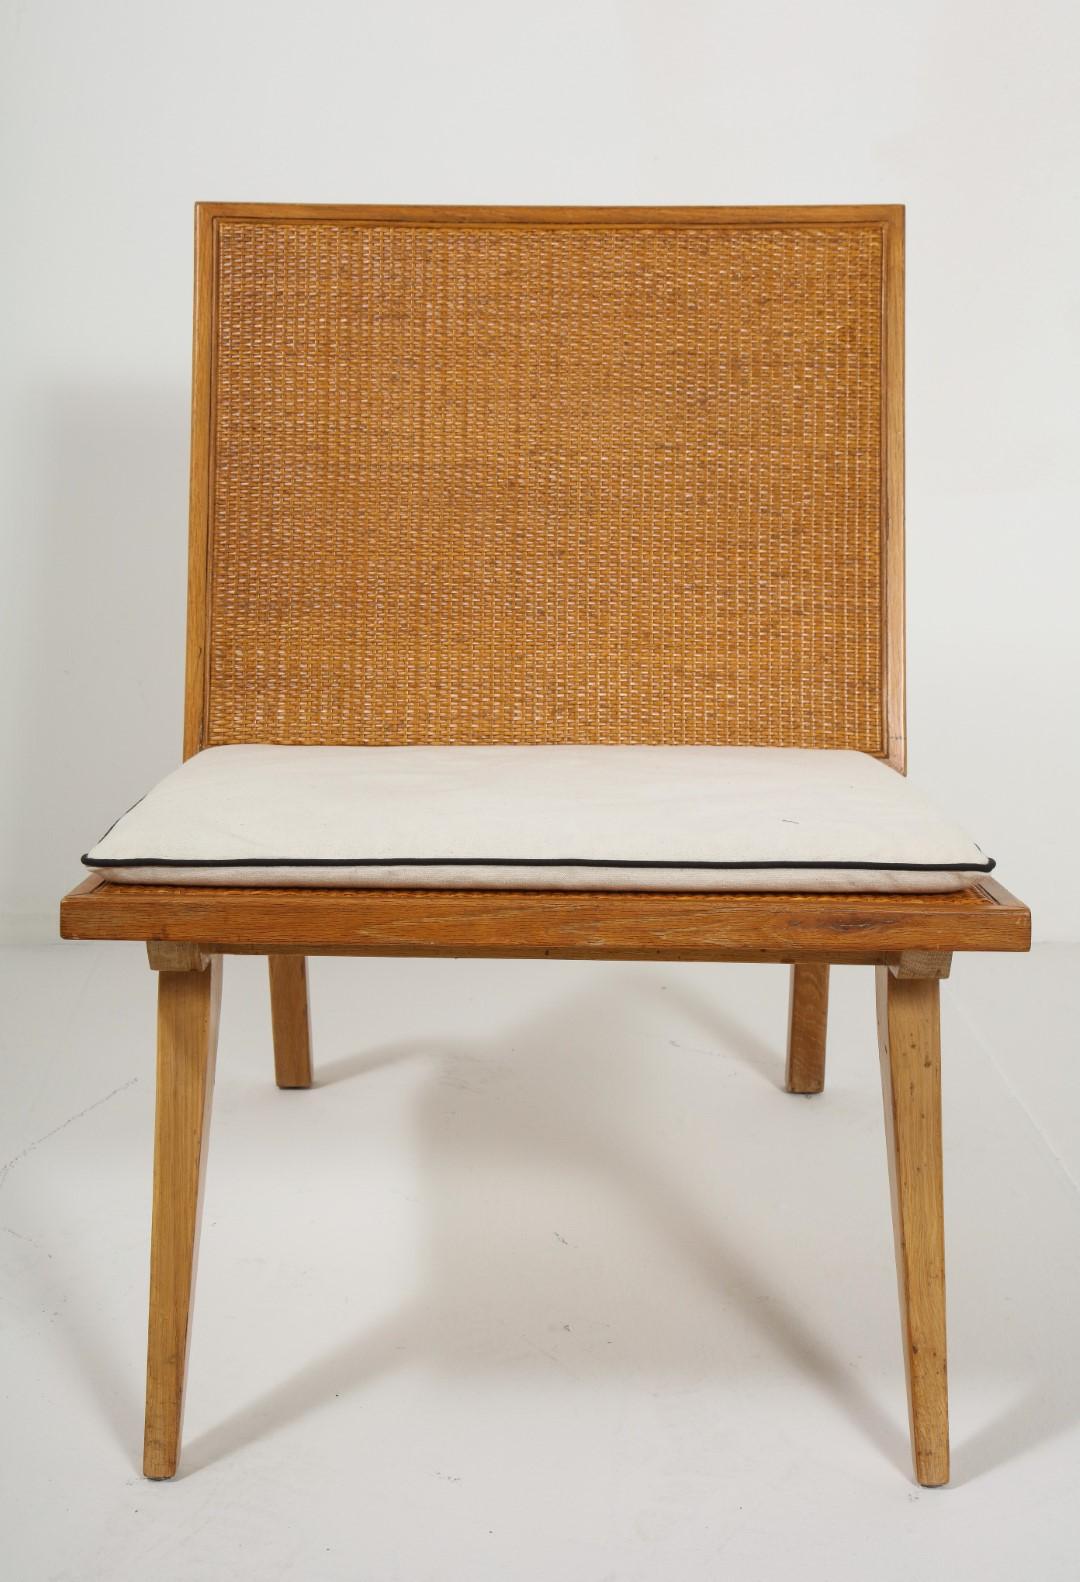 Midcentury Woven Oak Lounge Chair by Edward Durell Stone for Fulbright In Good Condition For Sale In Chicago, IL